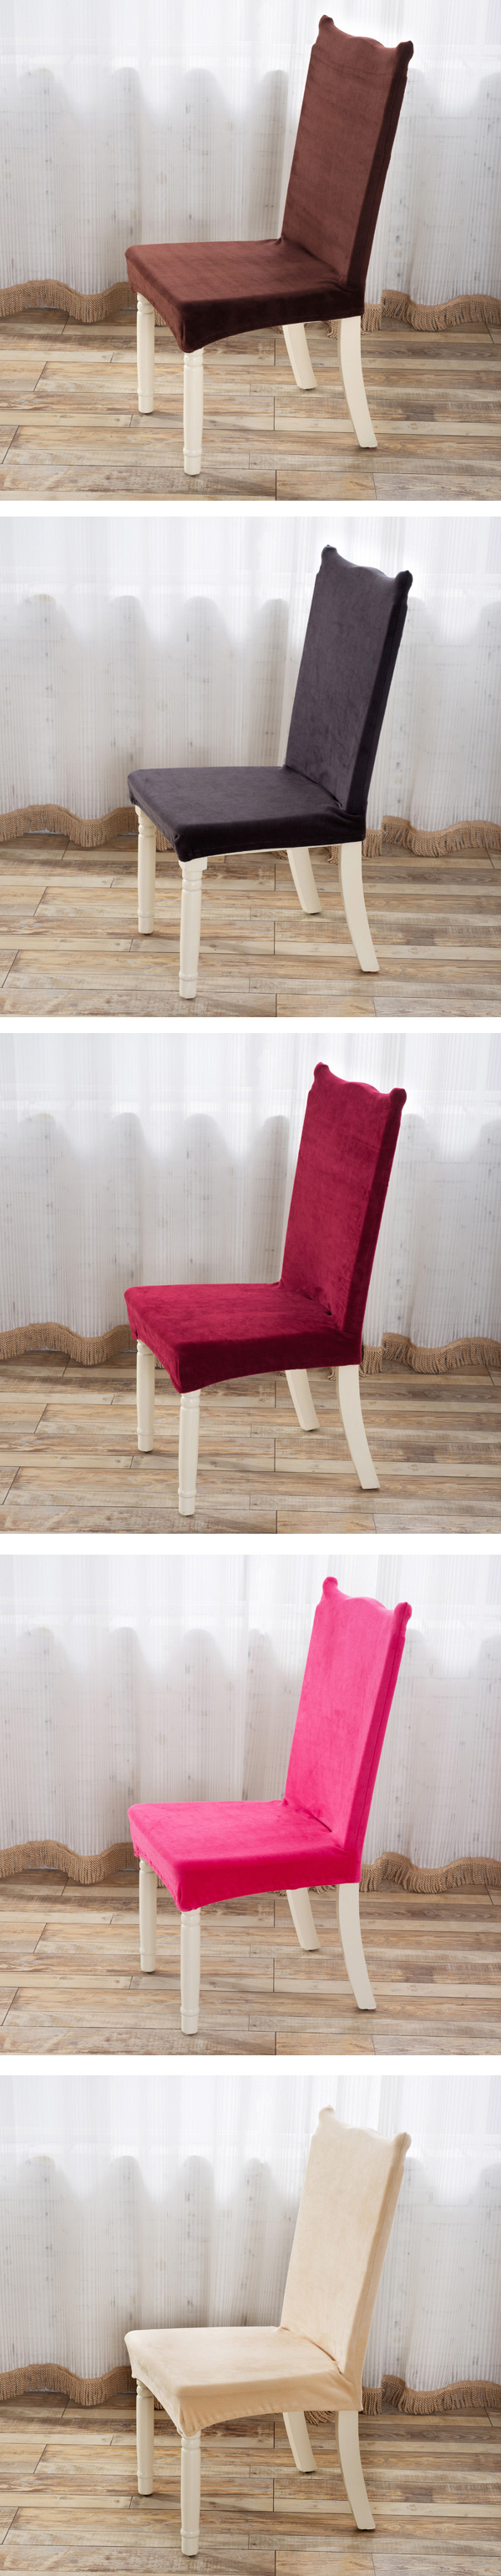 Plush-Thicken-Antifouling-Elastic-Stretch-Spandex-Chair-Seat-Cover-Party-Dining-Room-Wedding-Decor-1088204-1